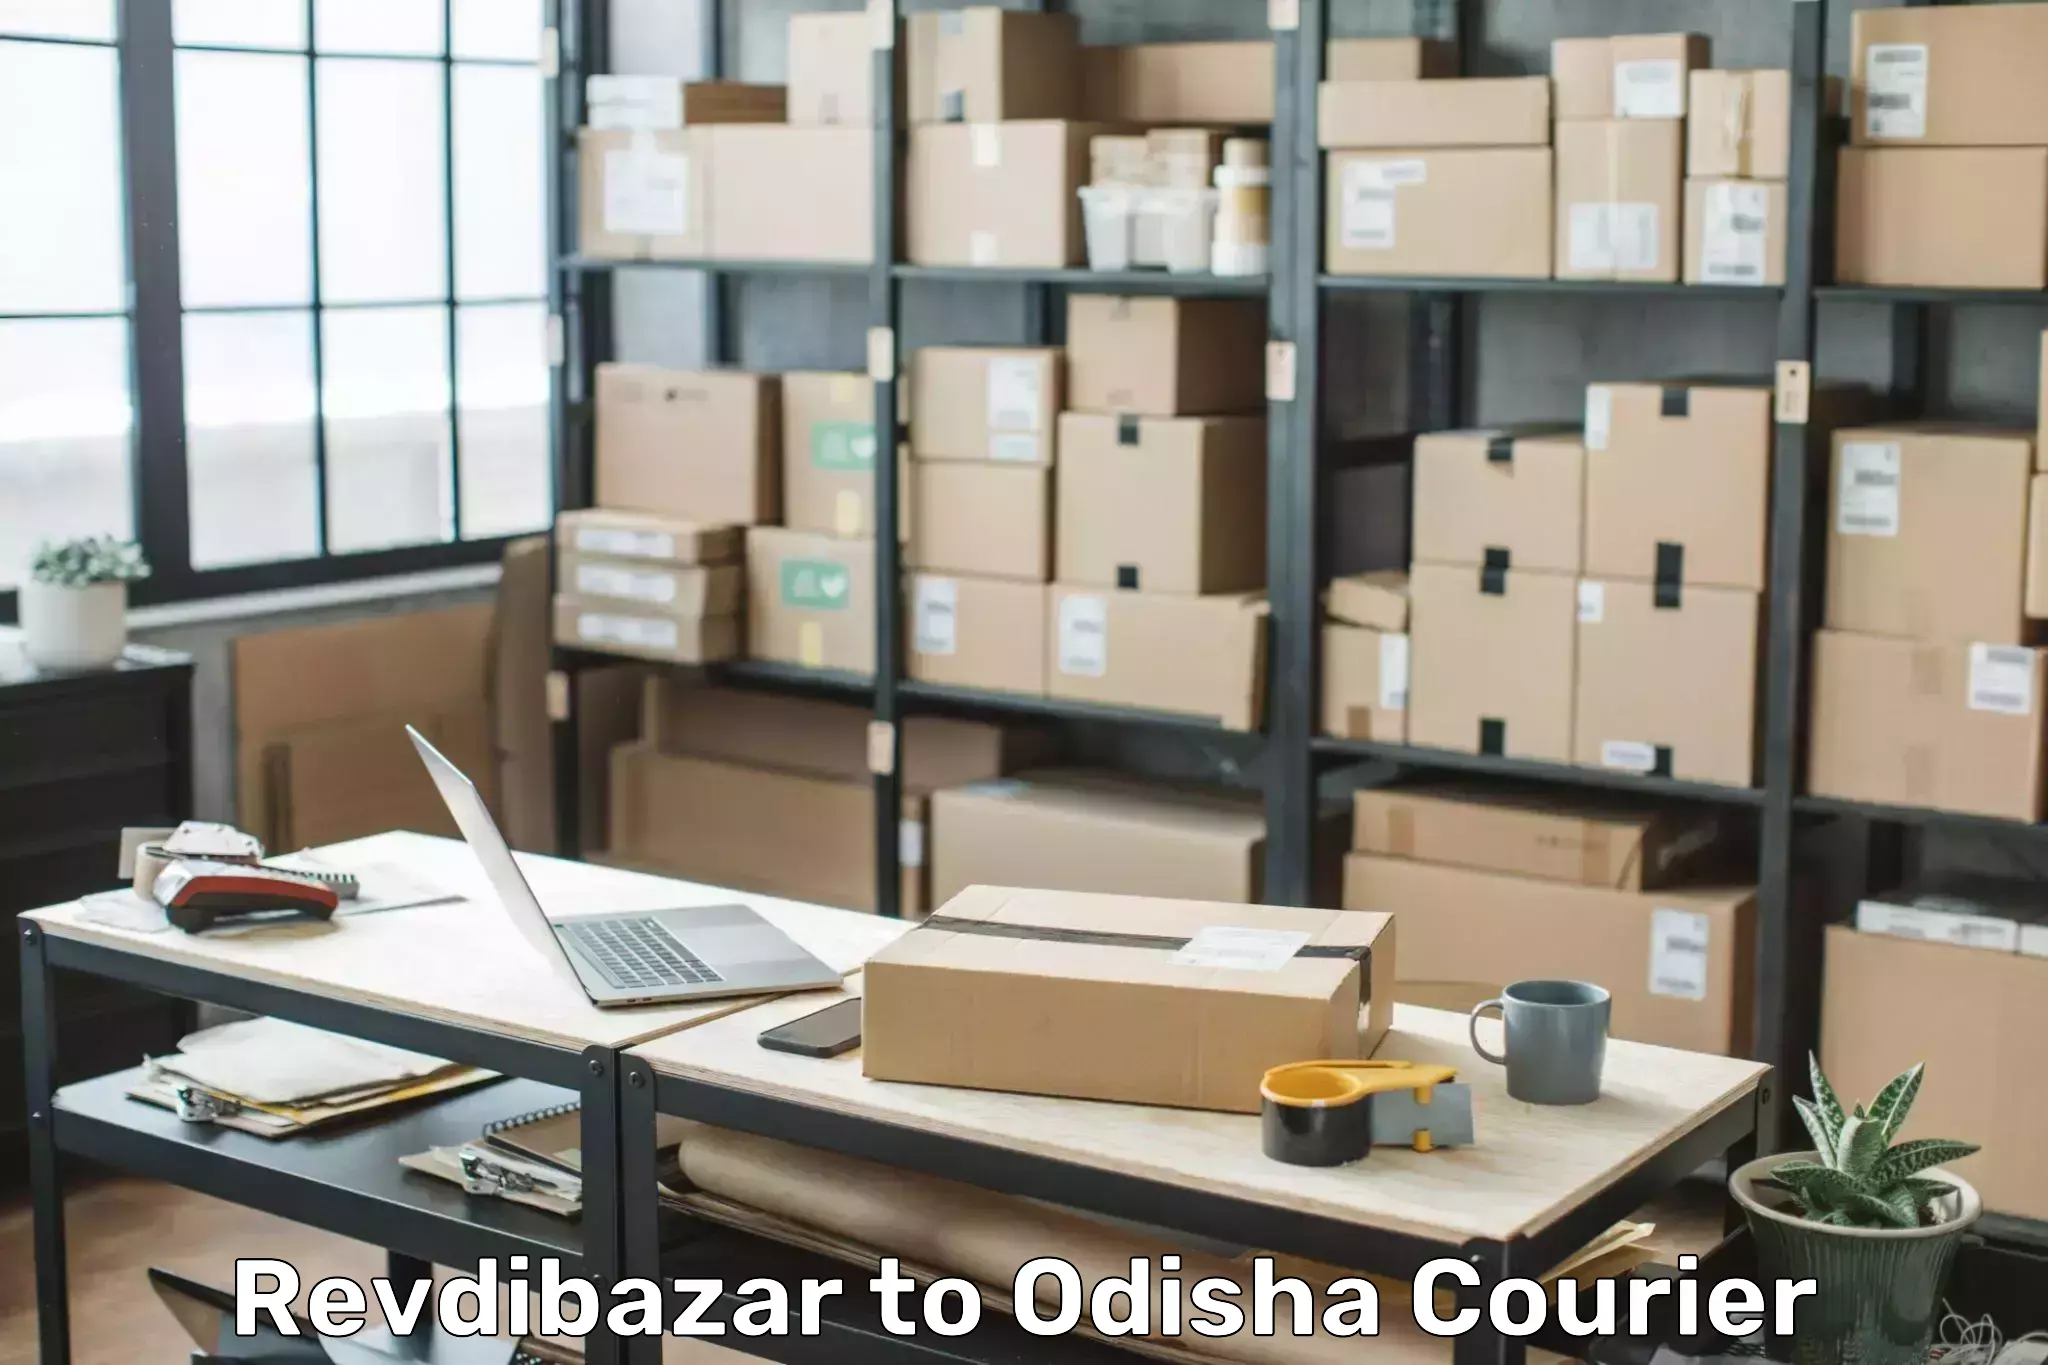 Excess baggage transport in Revdibazar to Odisha